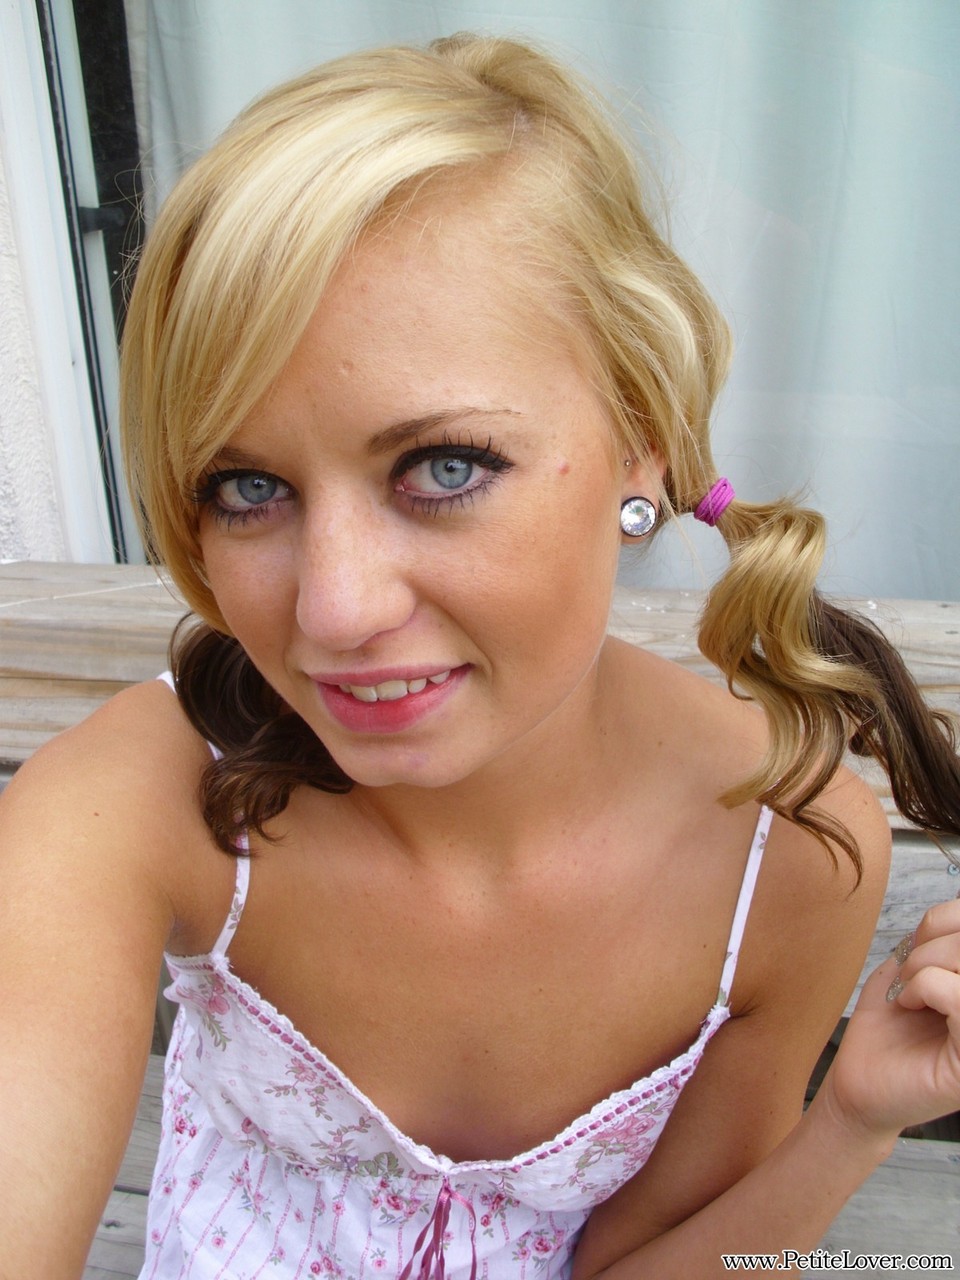 Cute blonde Tiff in pigtails showing off her wee small tits & tiny bald pussy 色情照片 #428478629 | Petite Lover Pics, Tiff, Amateur, 手机色情